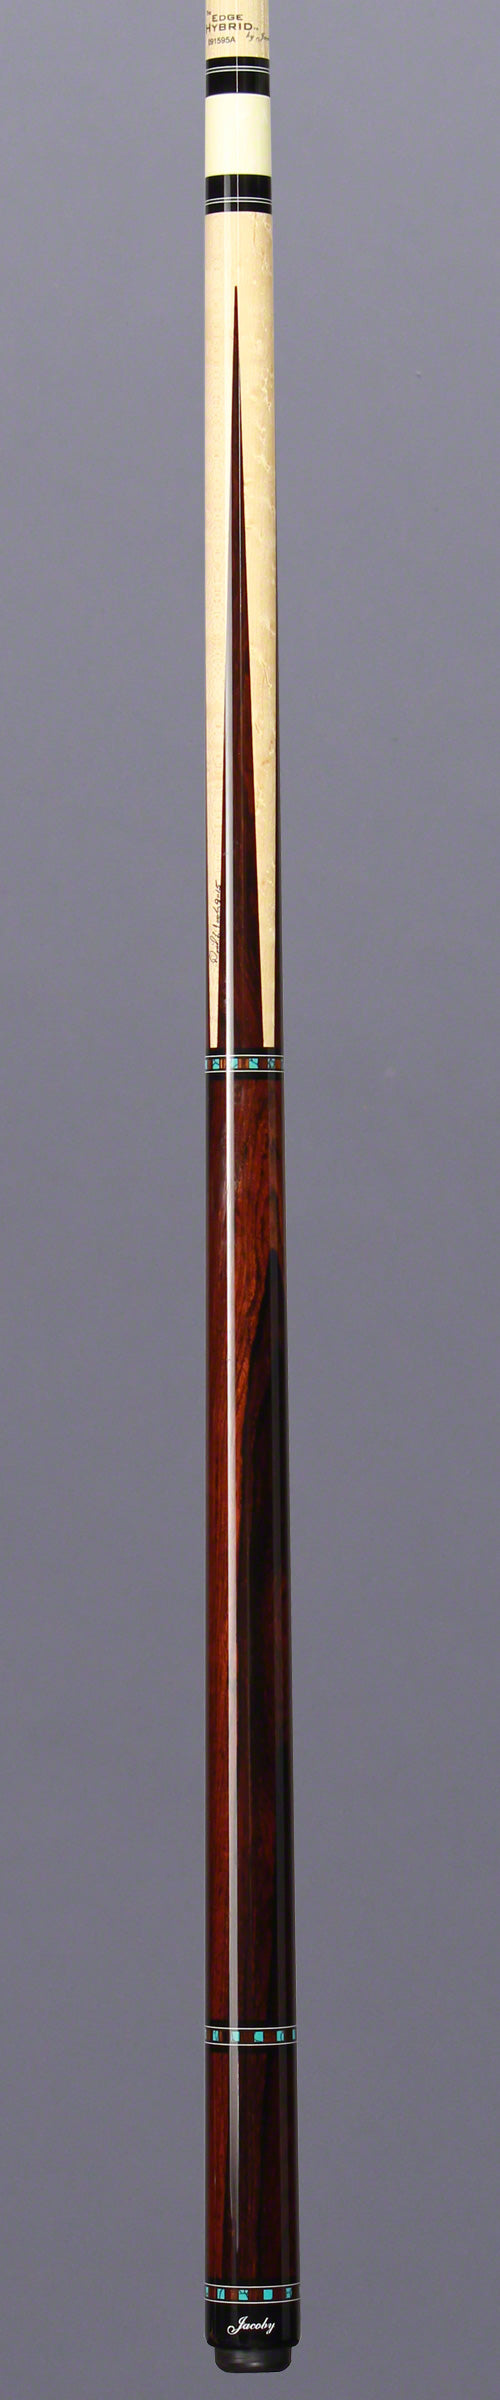 Jacoby HB2 Cocobolo 4 Point Pool Cue